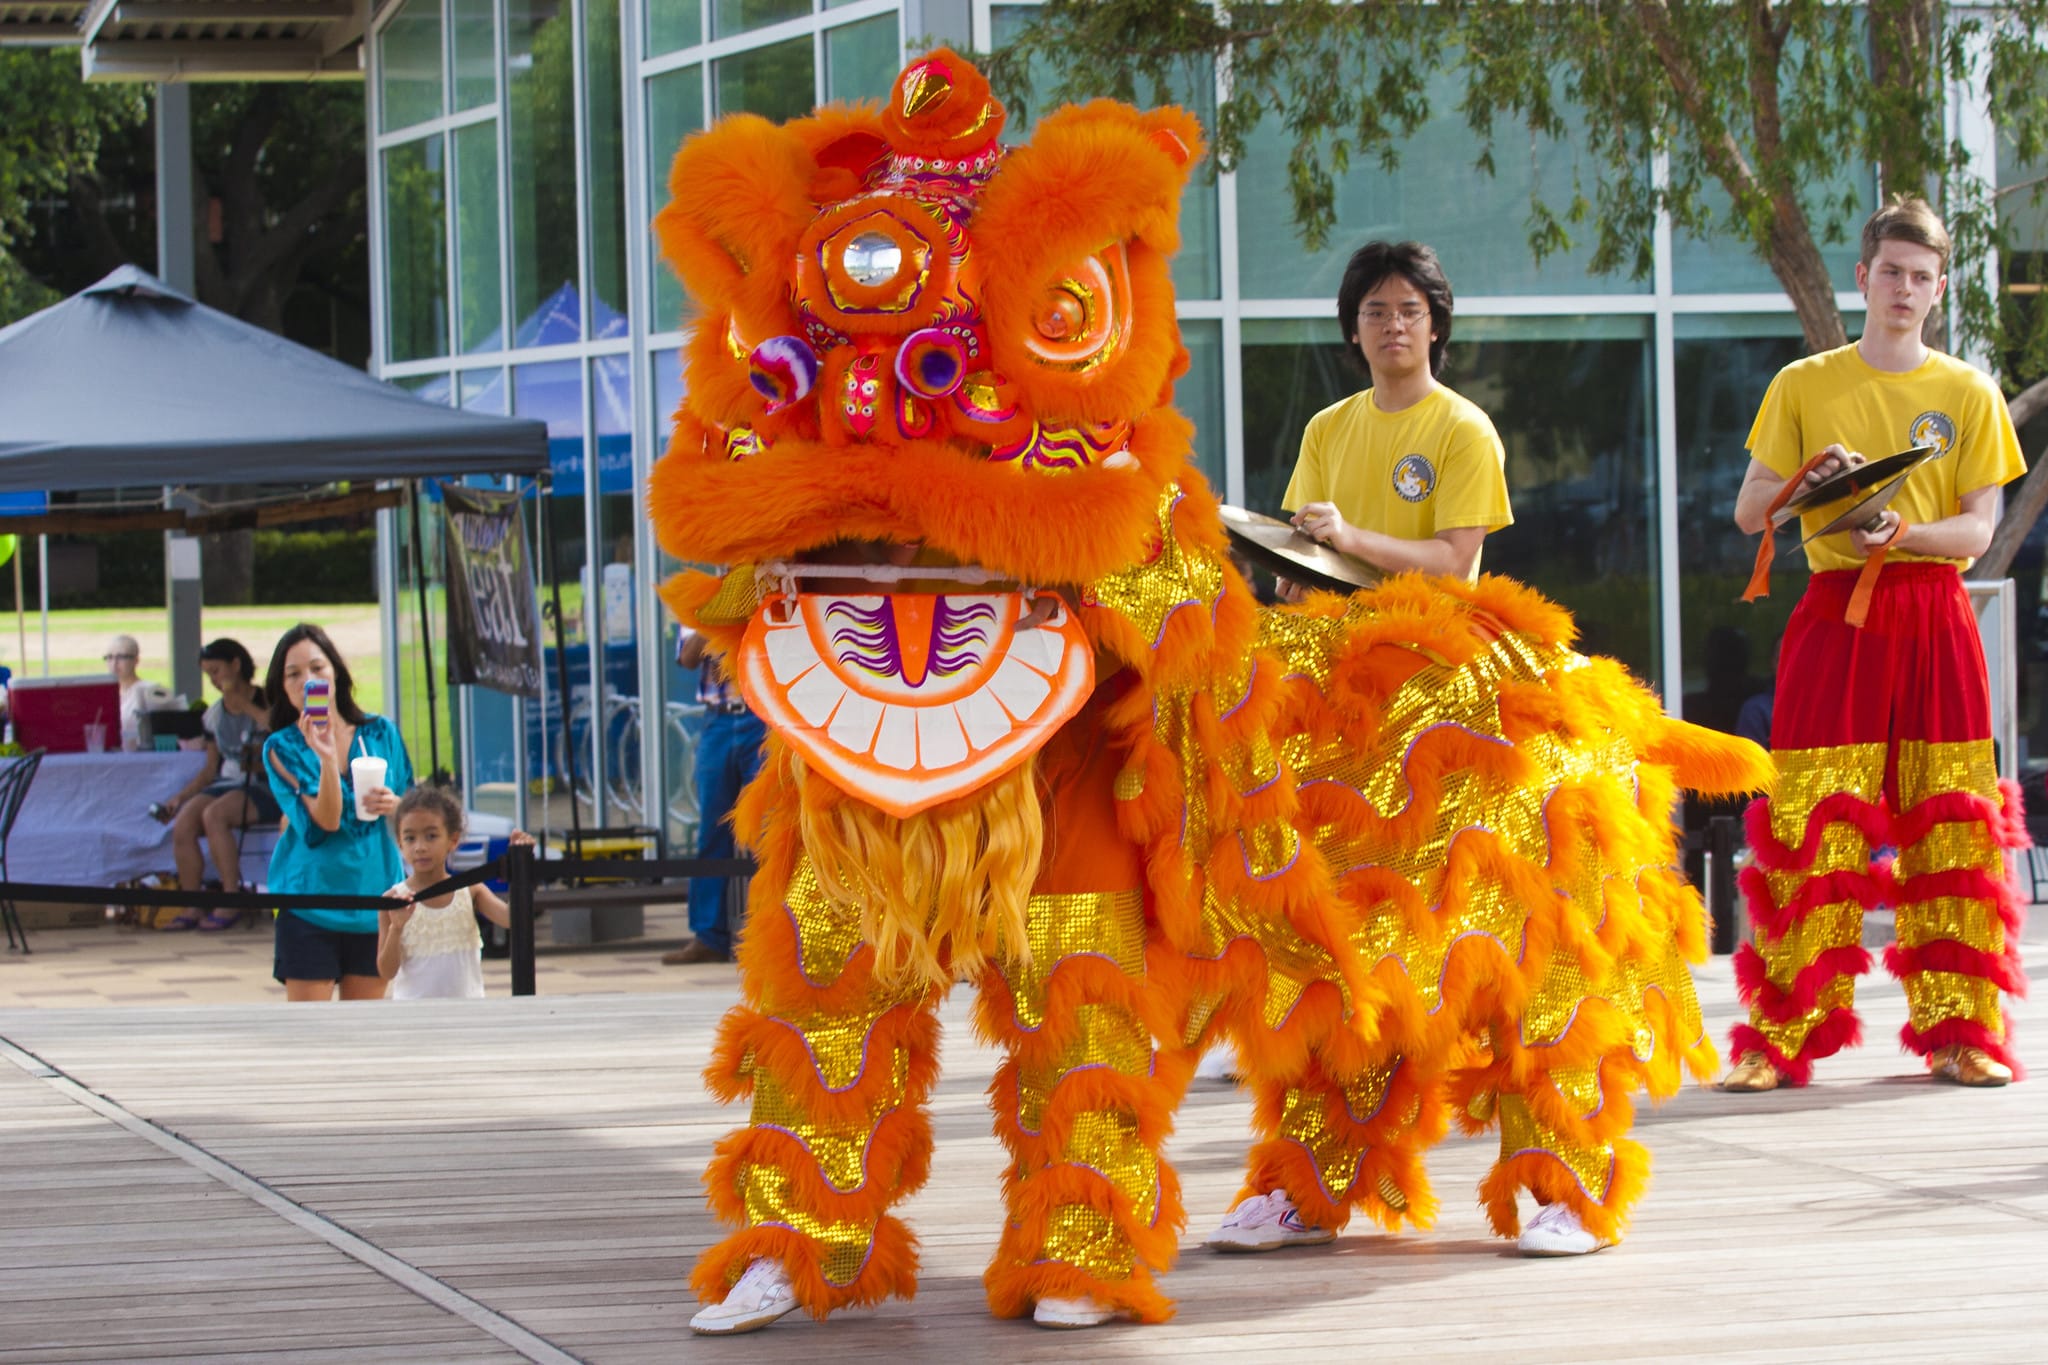 Lee's Golden Dragon performs at Discovery Green in downtown Houston